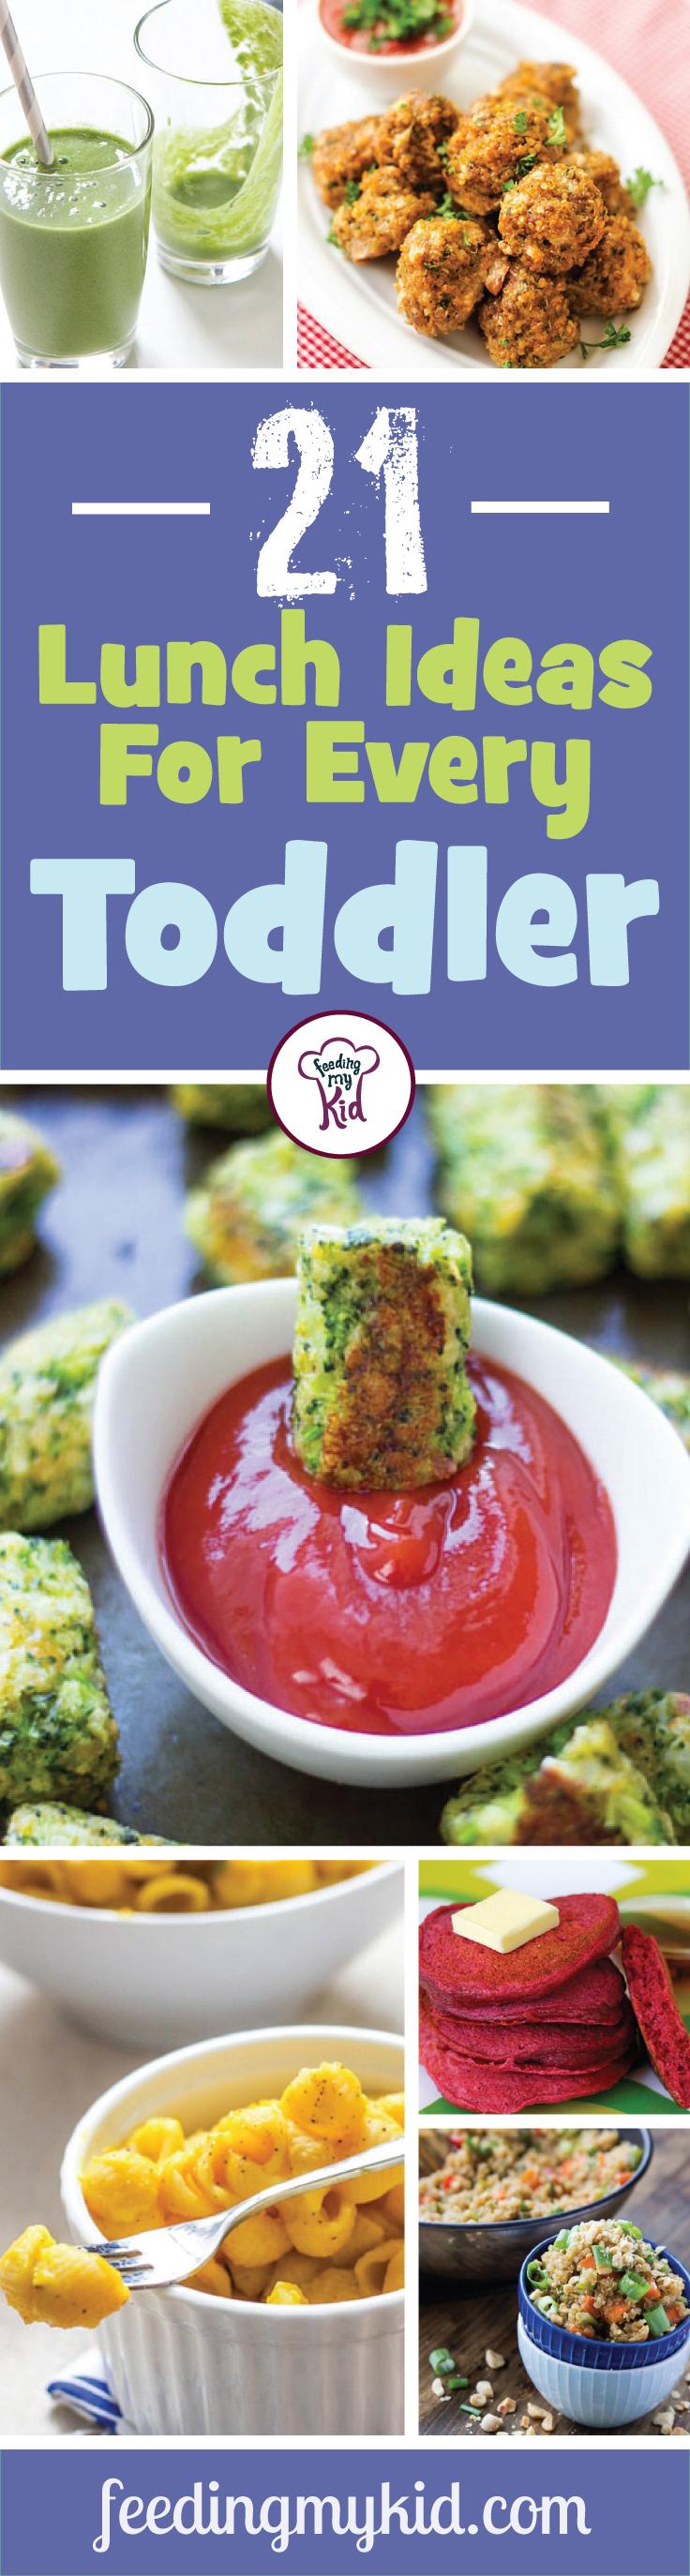 21 Lunch Ideas For Every Toddler - This is a must pin! Here's our ultimate list of toddler lunch ideas. From sweet potato lentil and cheddar croquettes to healthy baked broccoli tots; these recipes are sure to please any toddler from the pickiest little one to the food crazy tot! This is a must share! #fmk #recipes 